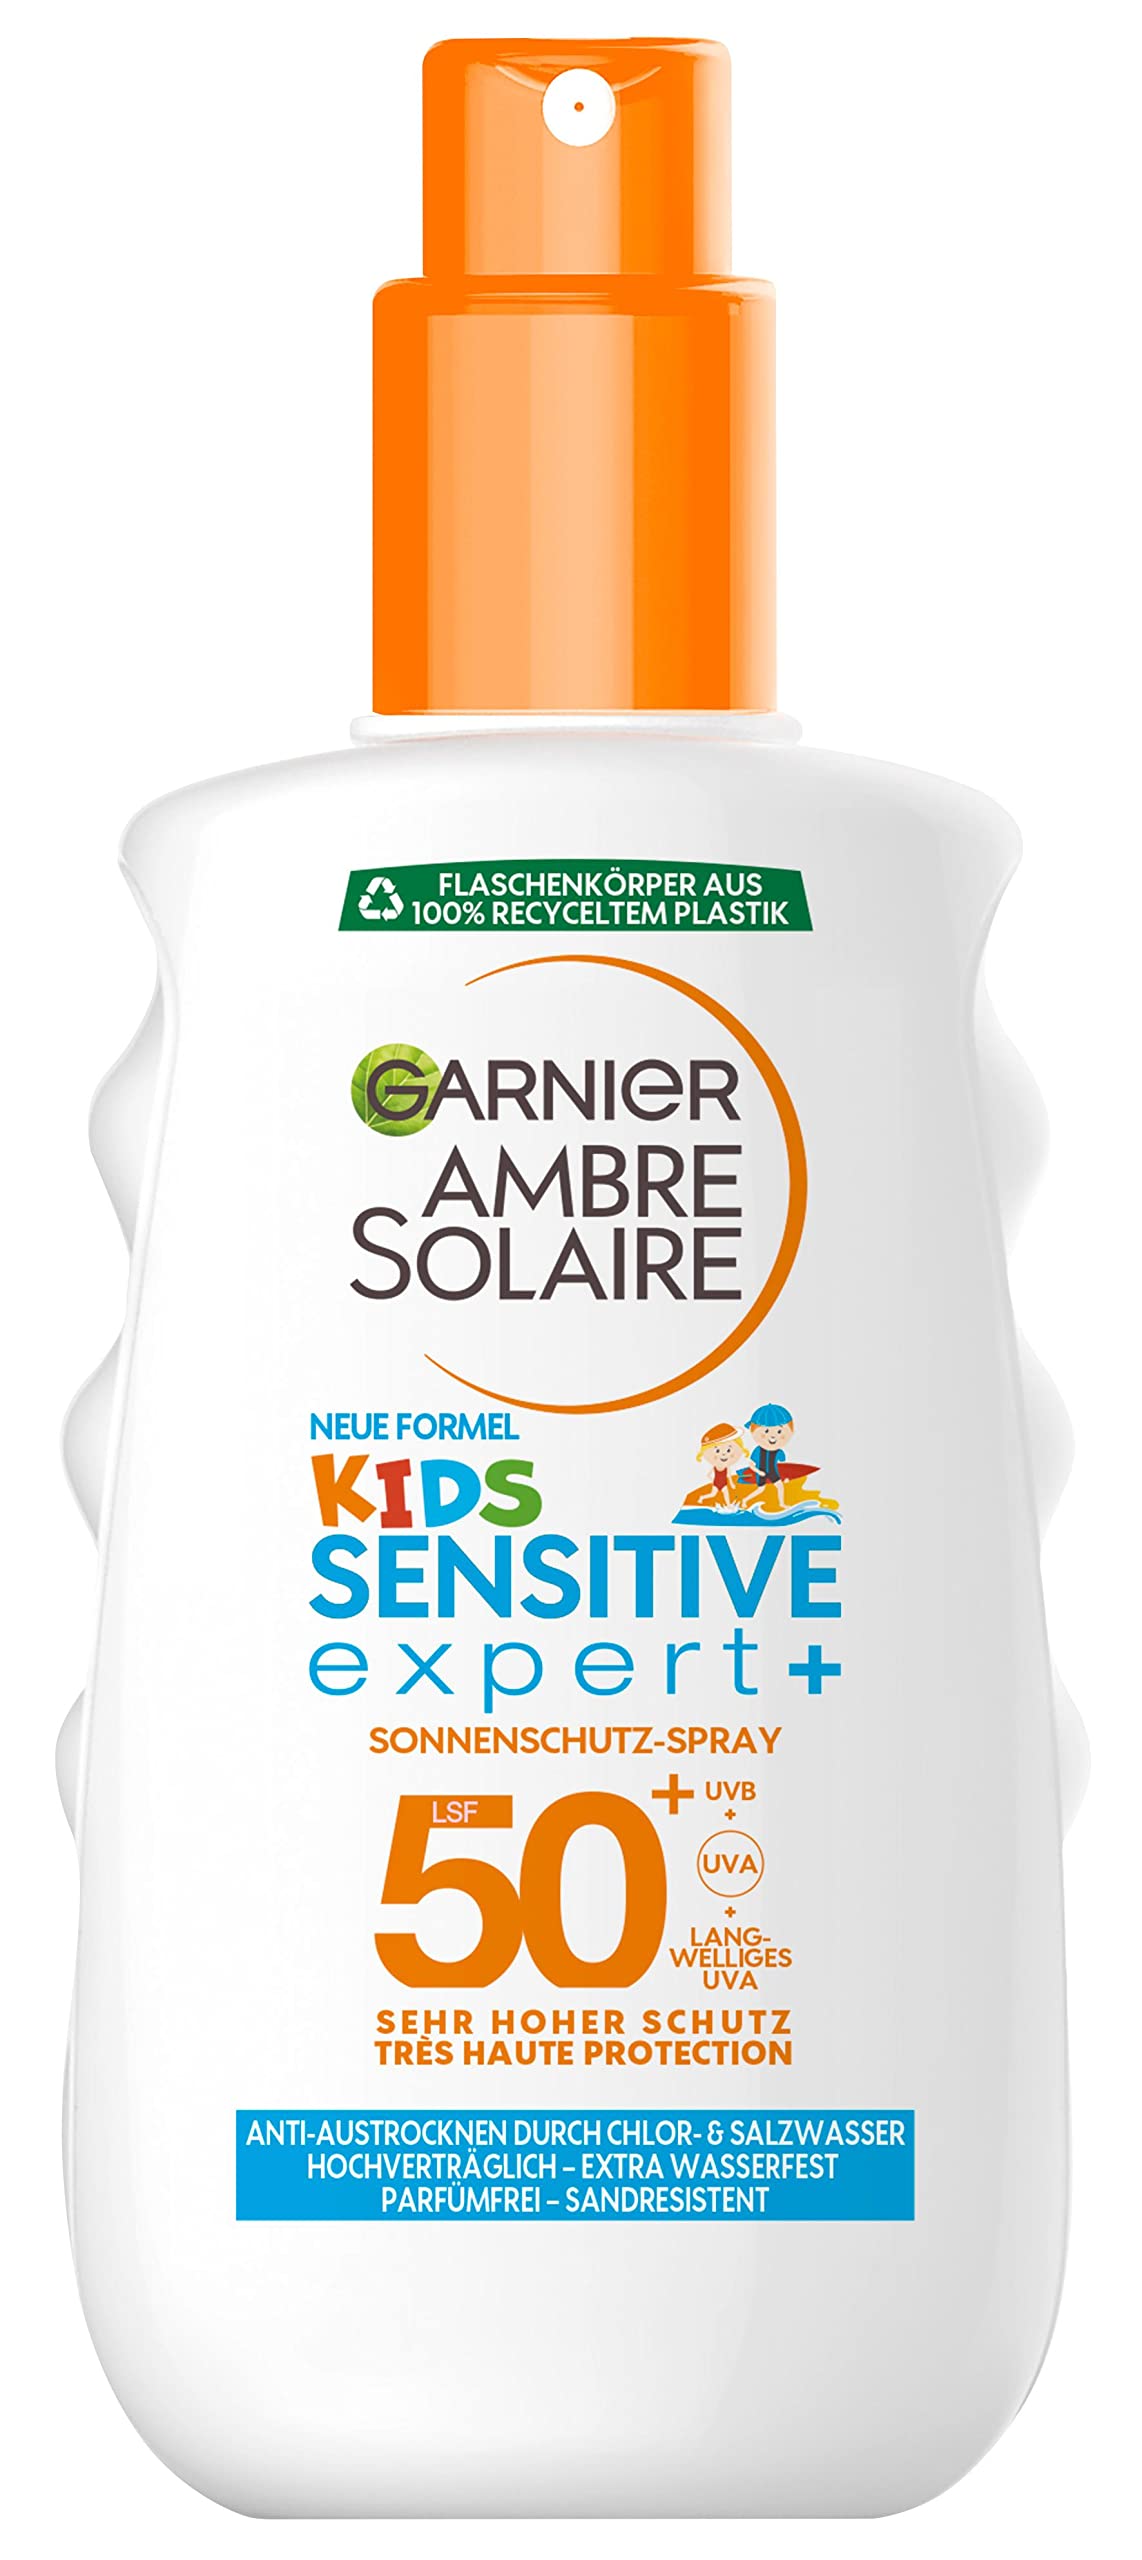 Garnier Ambre Solaire Kids Sensitive Expert+ Sun Protection Spray SPF 50+ for Children, Waterproof and Sand Resistant, 1 x 200 ml